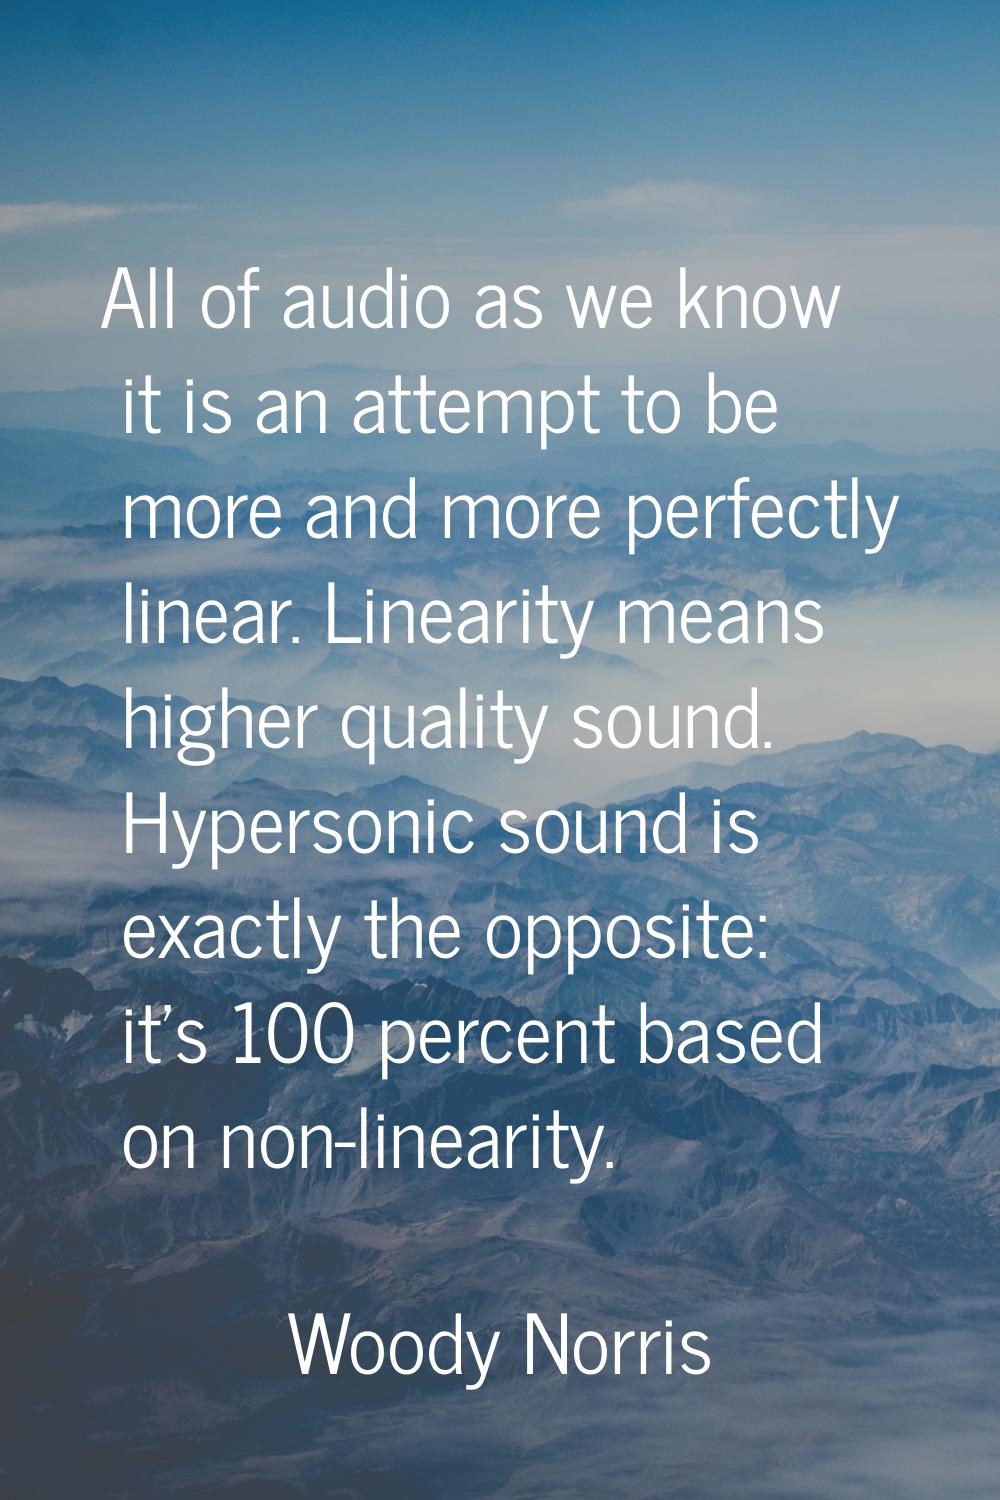 All of audio as we know it is an attempt to be more and more perfectly linear. Linearity means high